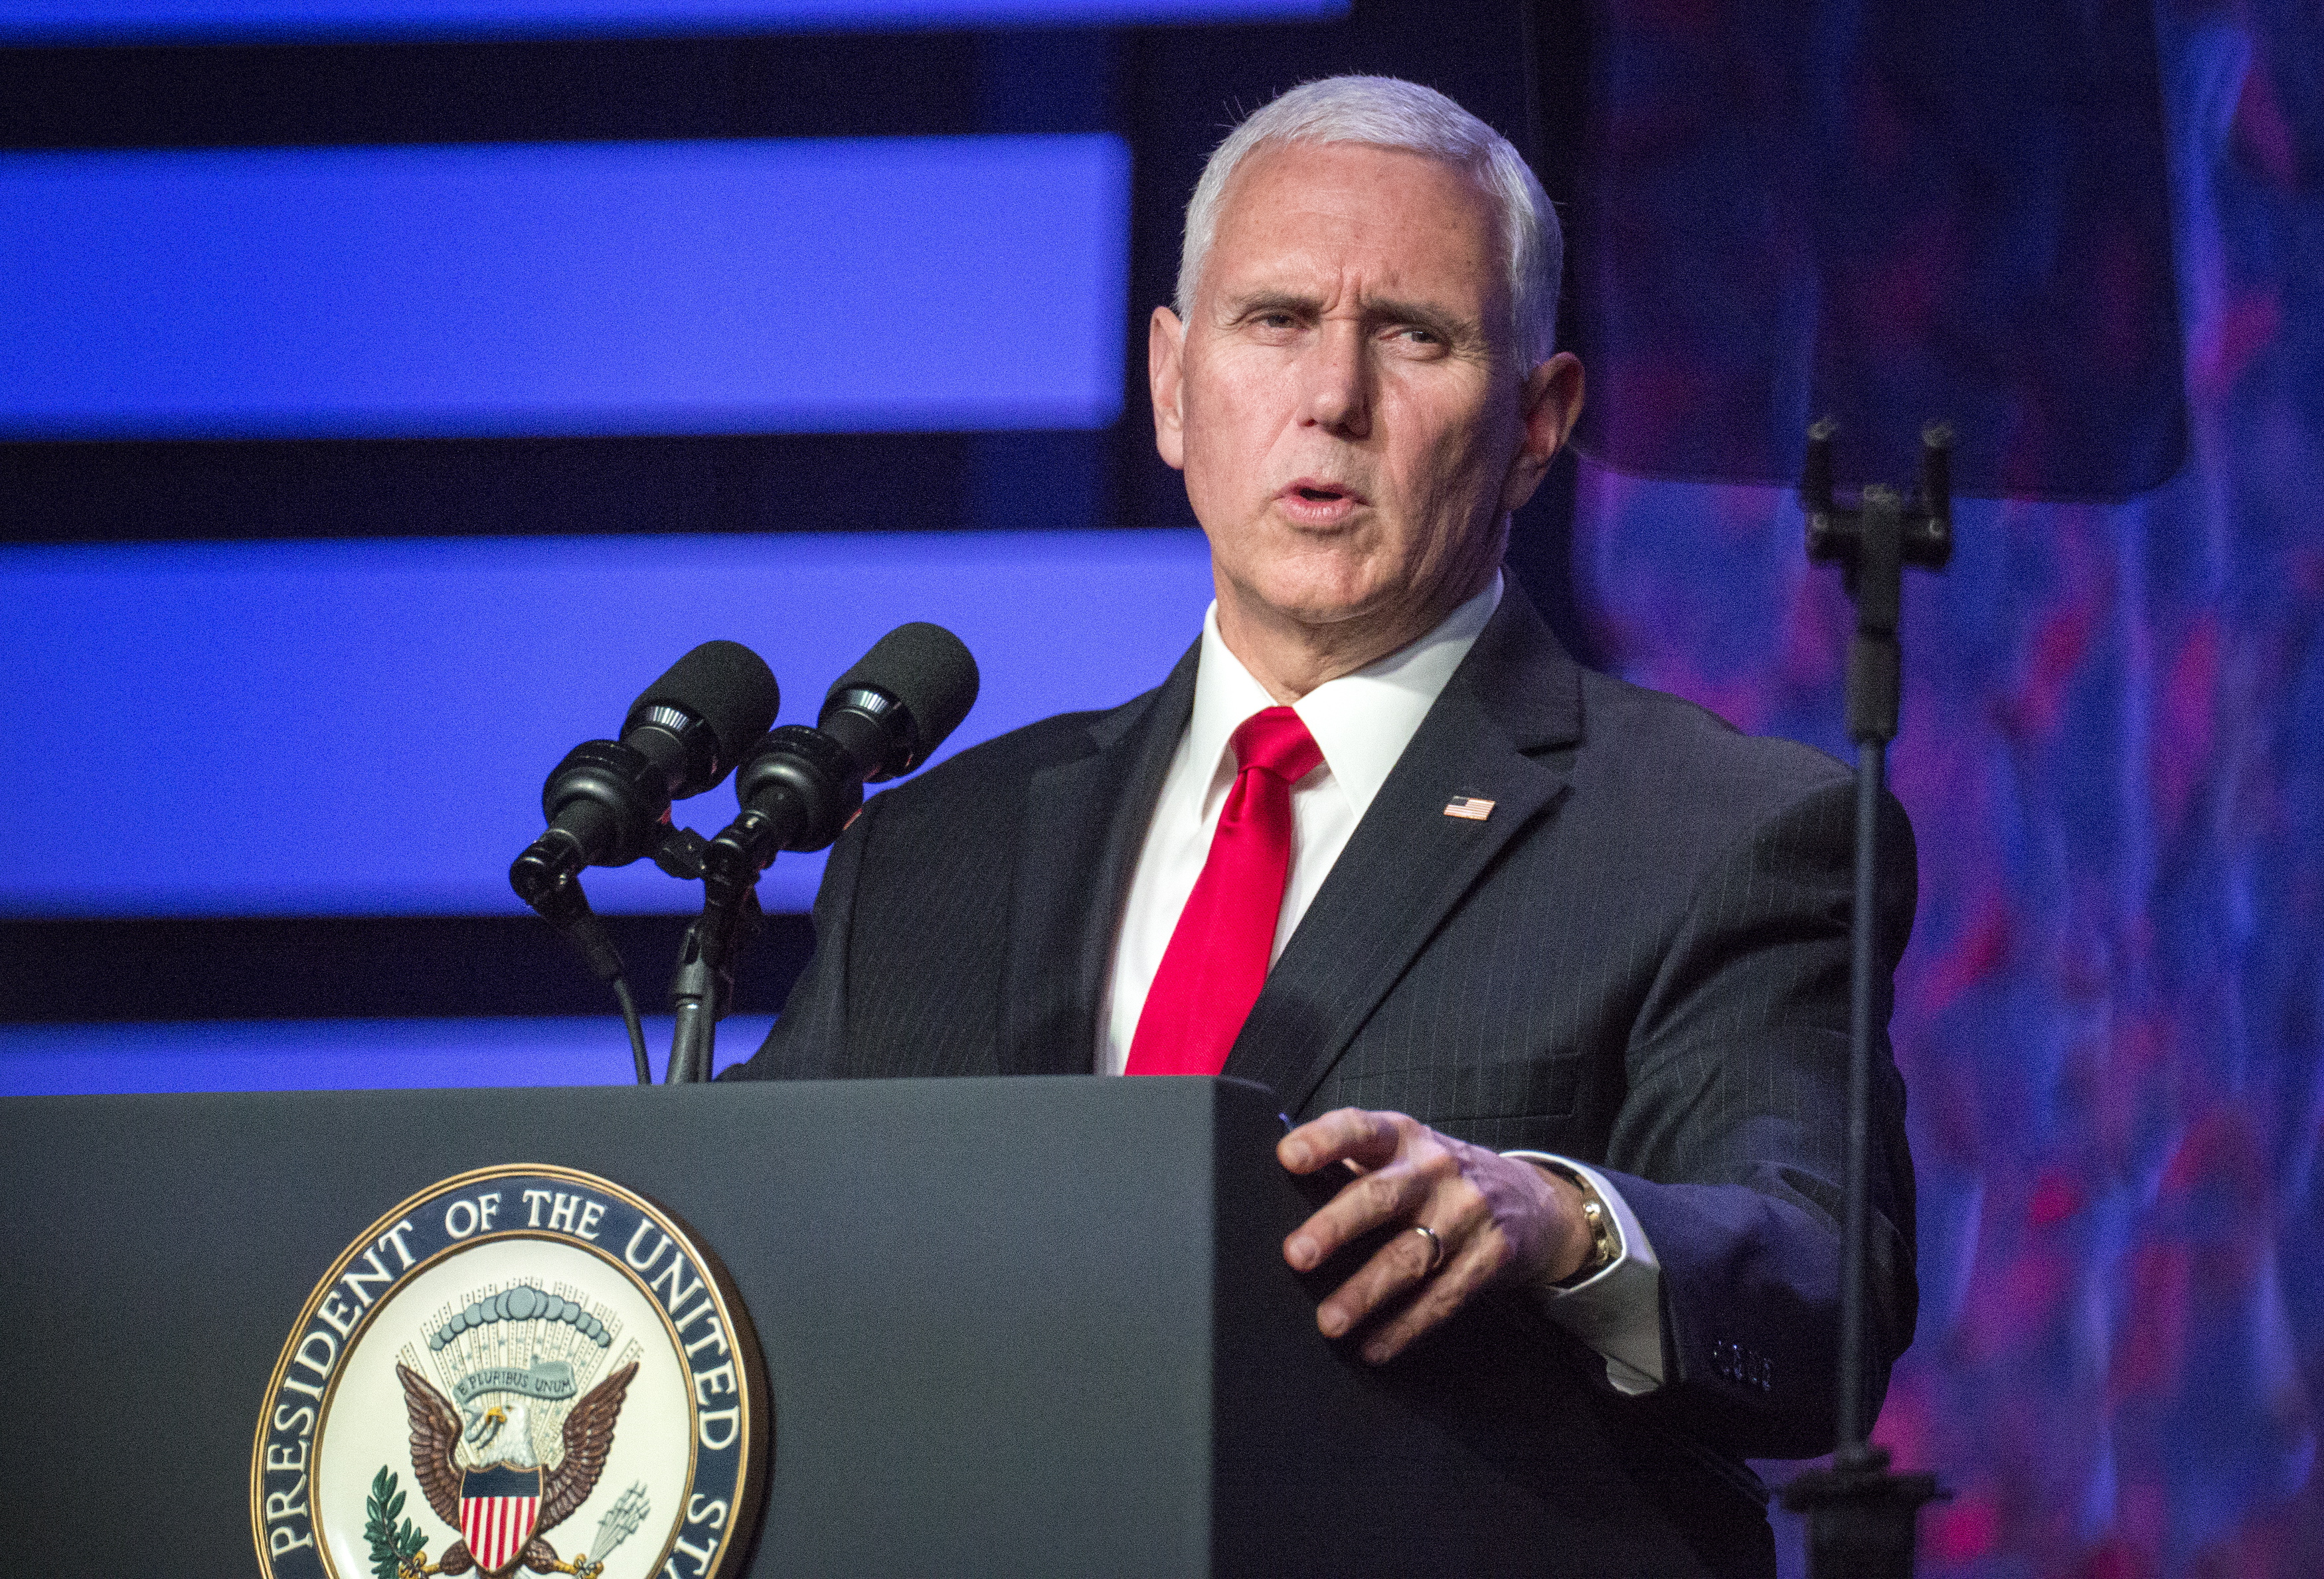 epa07337001 US Vice President Mike Pence speaks at event in support of Venezuelan opposition leader Juan Guaido after a roundtable with Venezuelan exiles and community leaders at Iglesia Doral Jesus Worship Center in Doral, Florida, USA, 01 February 2019. Juan Guaido was recognized as Venezuela's interim president by the Trump administration. Roundtable participants include Florida Governor Ron DeSantis and fellow Republicans Sens. Marco Rubio and Rick Scott and Rep. Mario Diaz-Balart, plus Venezuelan Charge d'Affaires Carlos Vecchio, who has been designated as Venezuela's representative in the U.S. by Guaido.  EPA/CRISTOBAL HERRERA